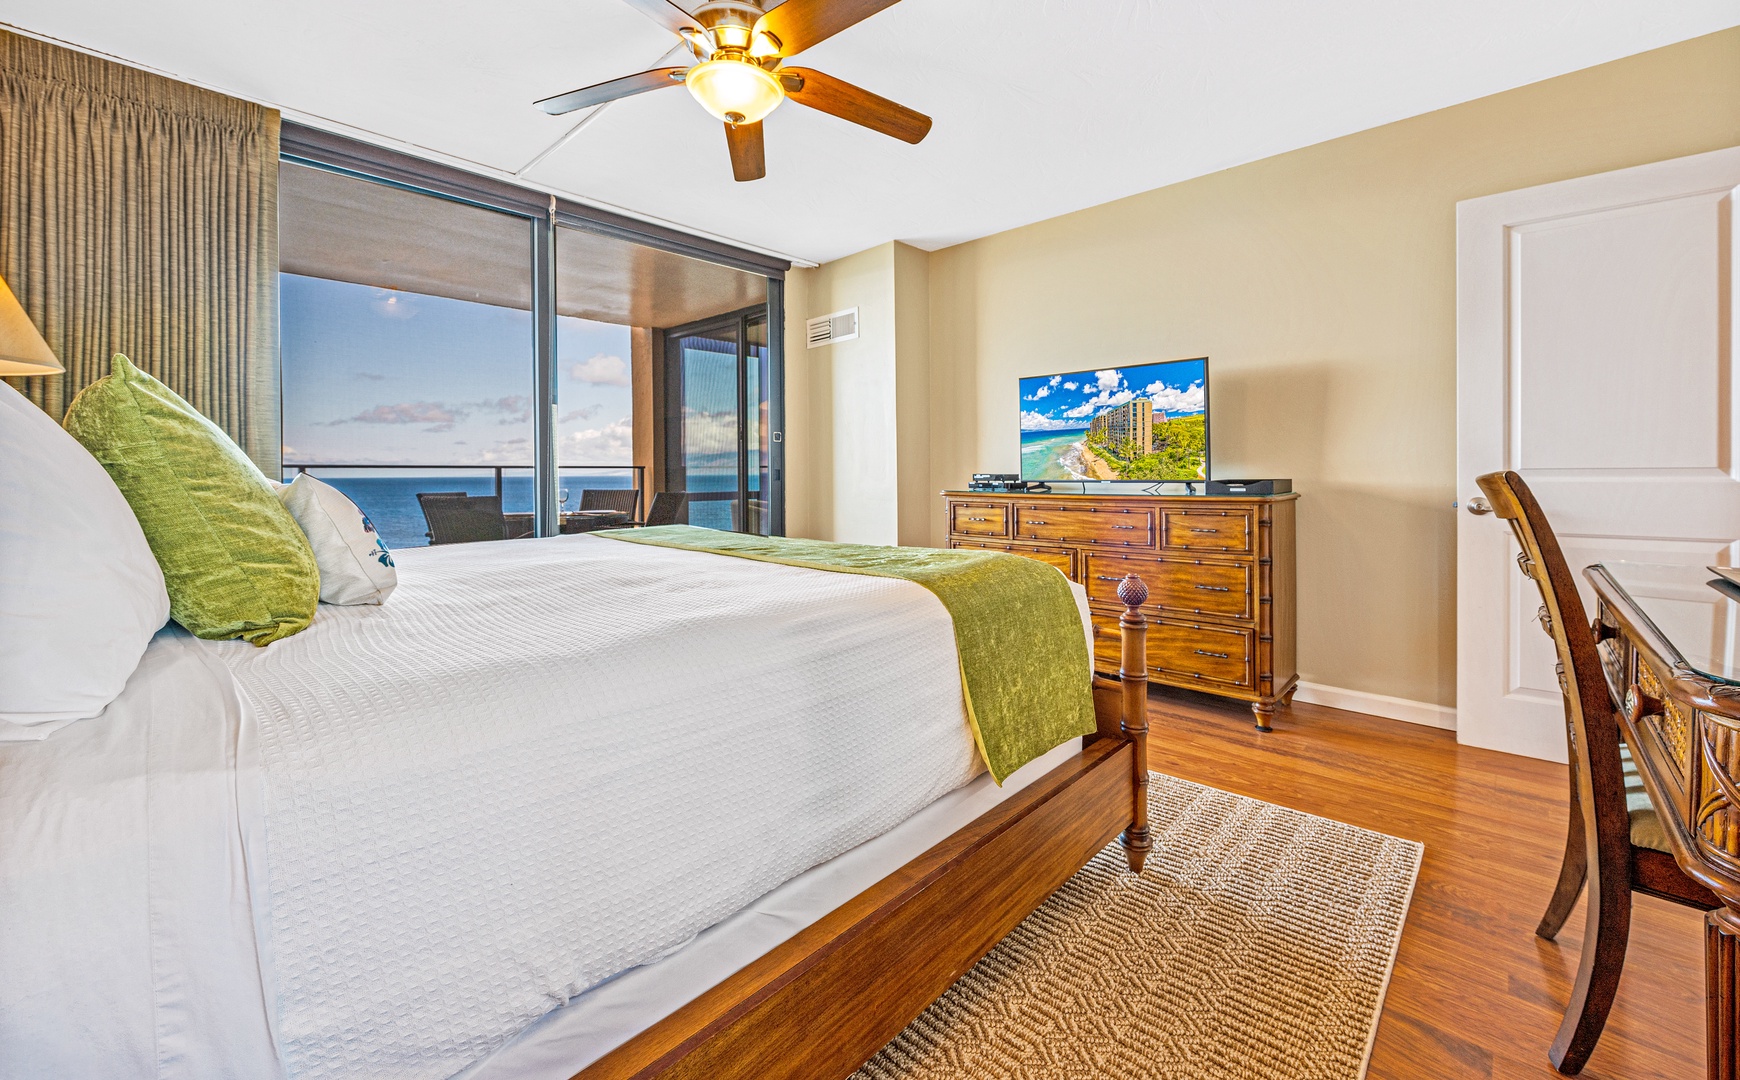 Bedroom with cal-king bed, lanai access, TV, and en-suite